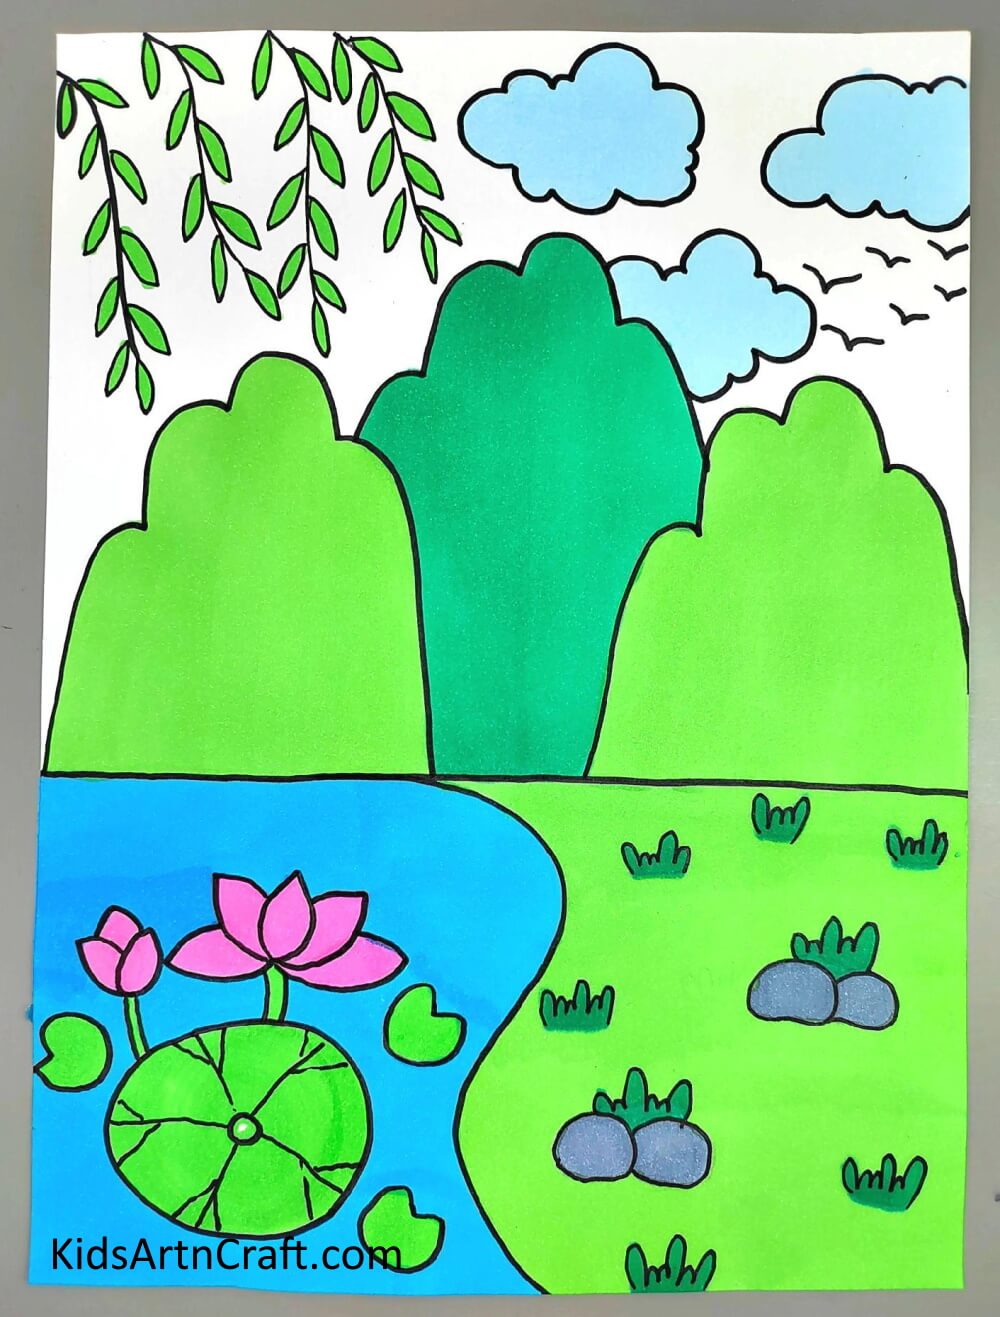 Coloring The Drawing - Beautiful Mountain Landscape Painting Proposal with Handprints